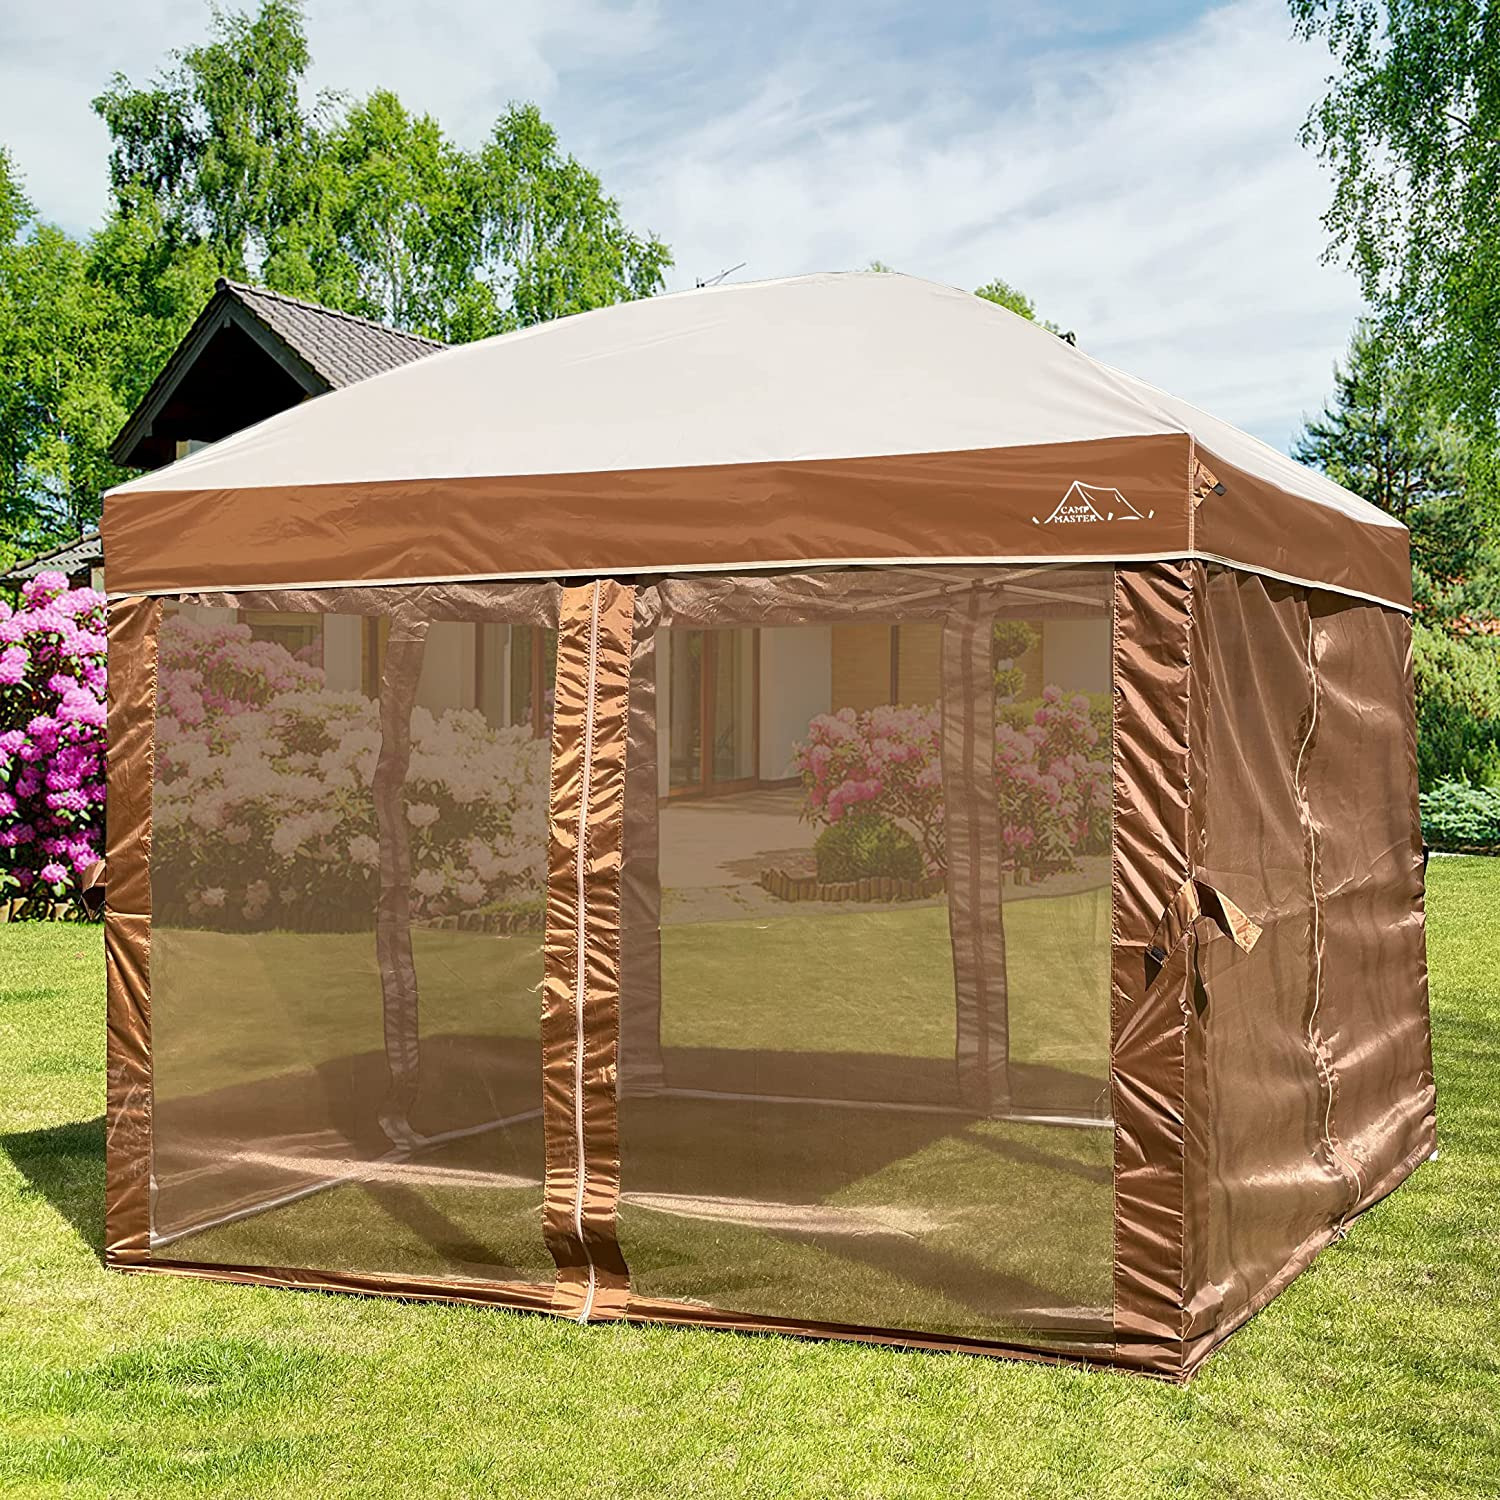 Camp Master Canopy Tent with Mosquito Netting, Outdoor 10X10 Pop-Up Dome Canopy,